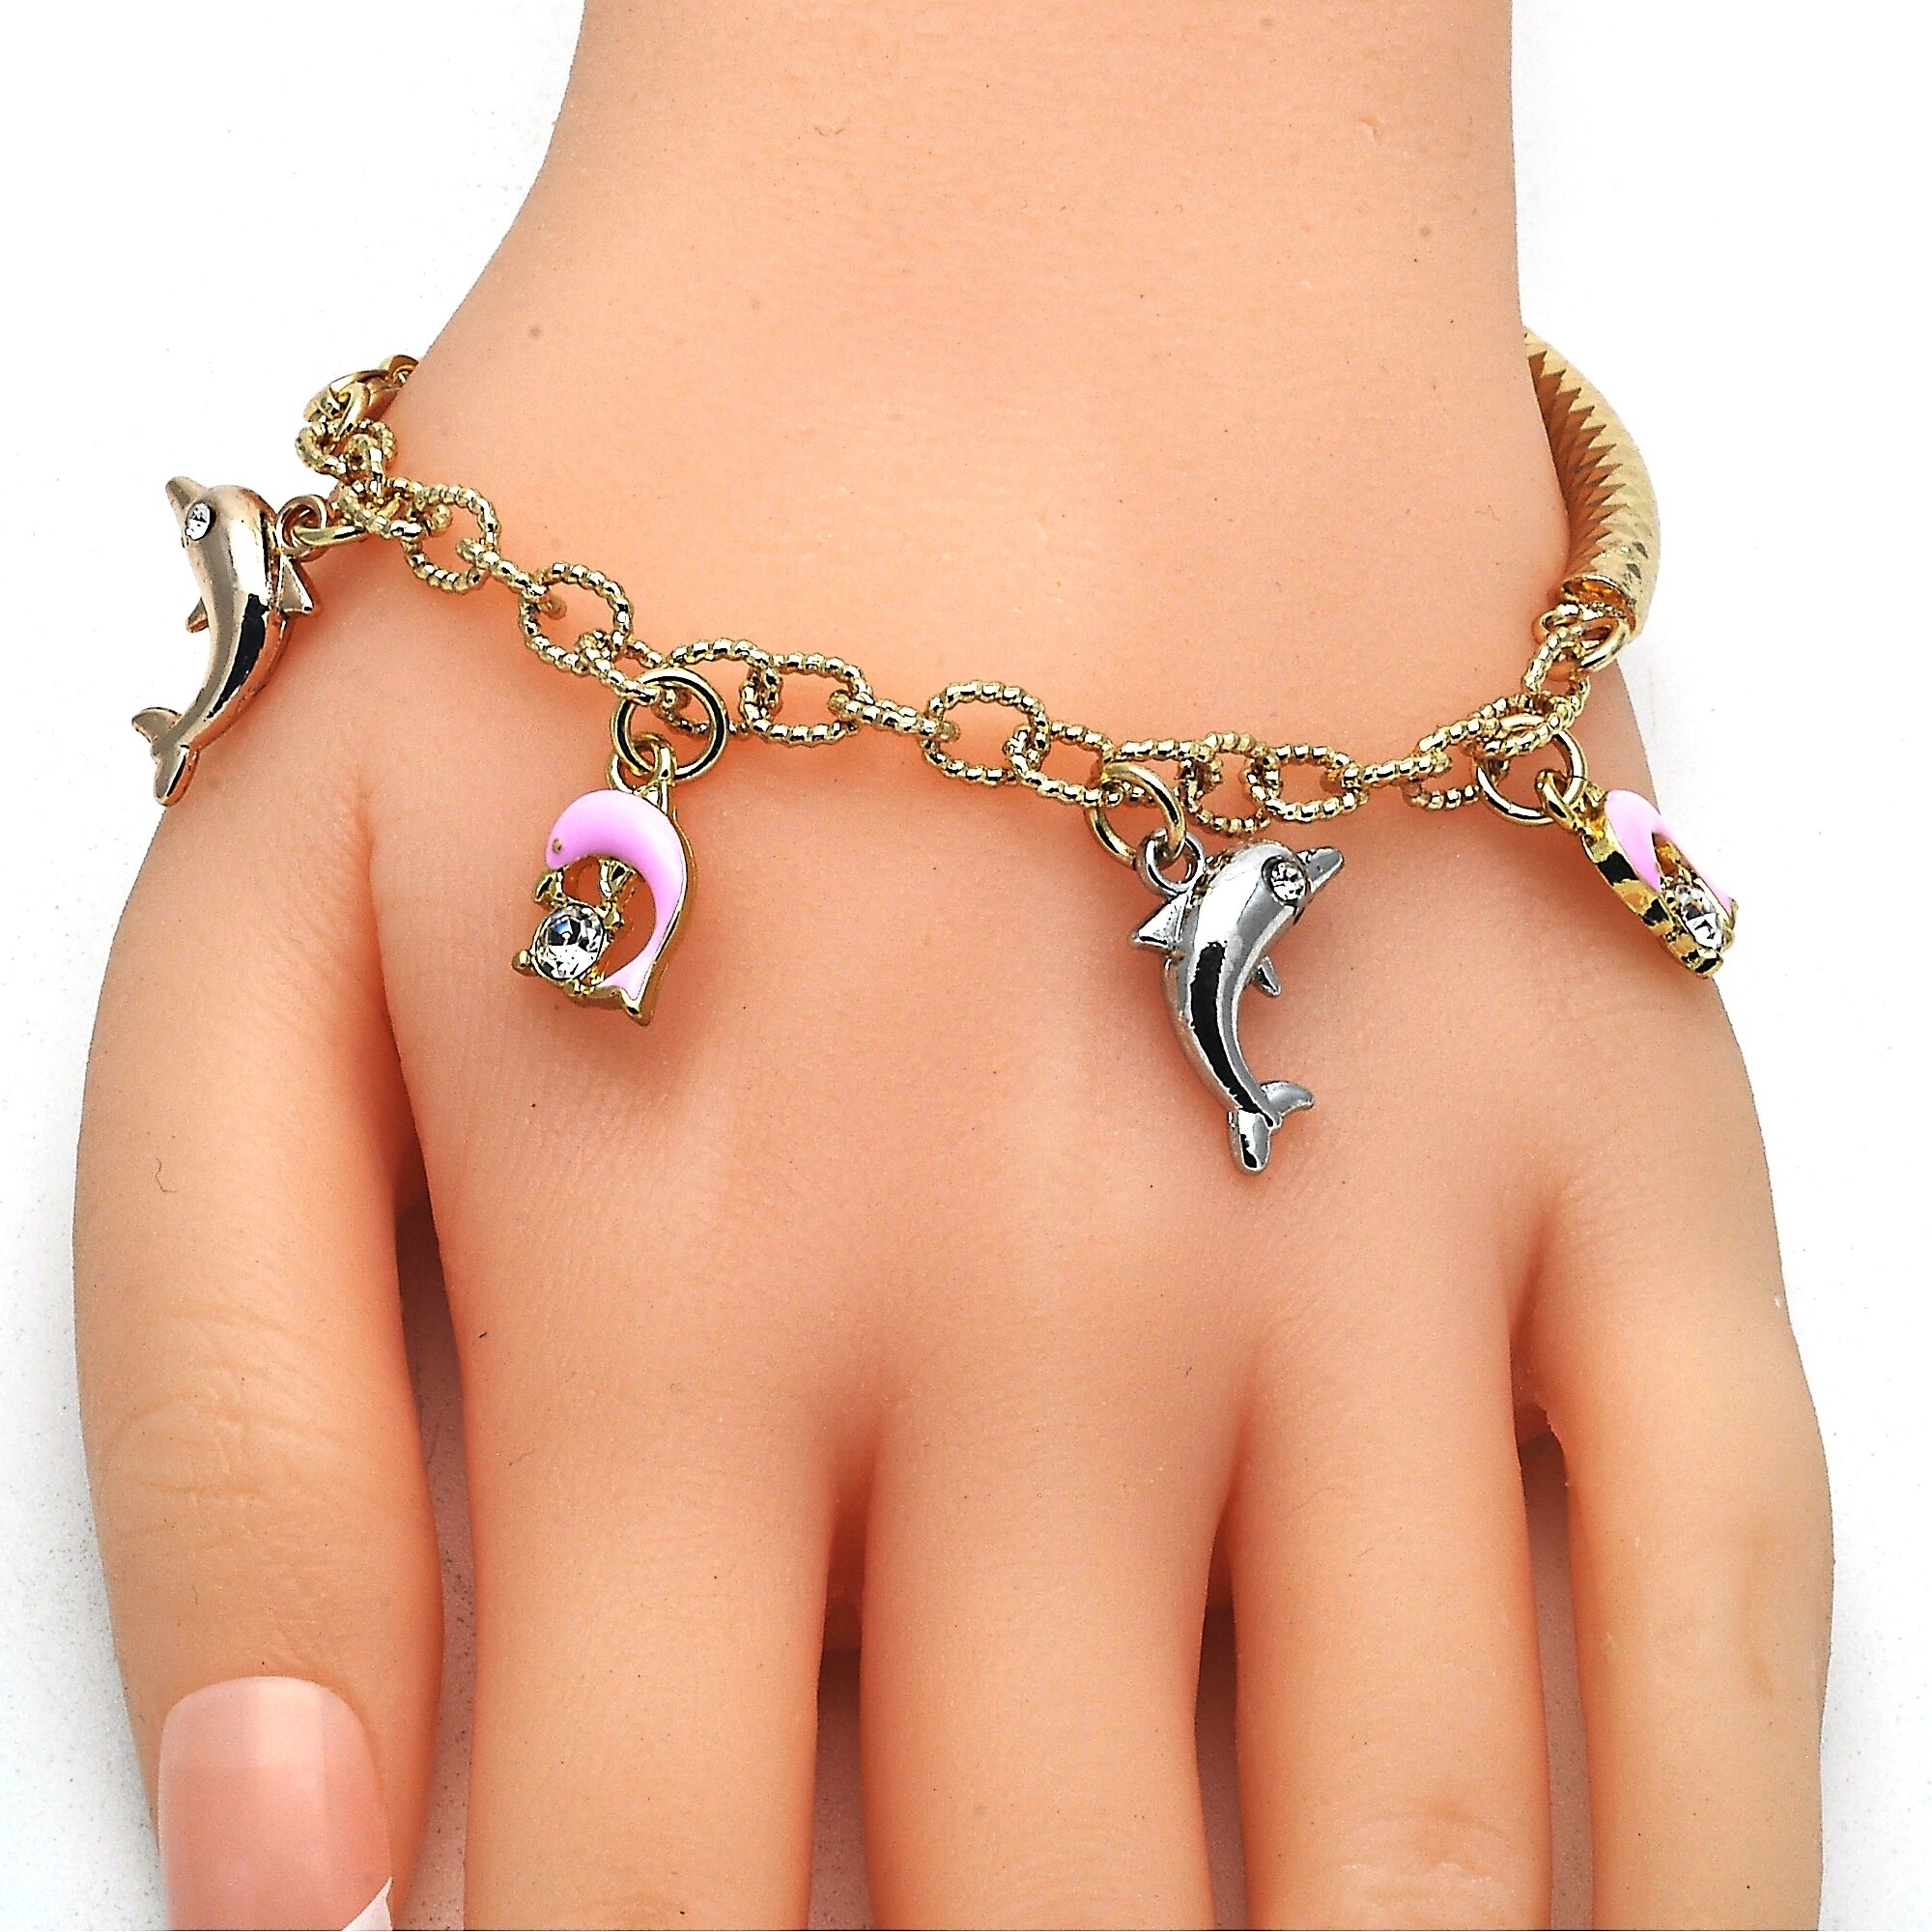 Gold Filled Charm Bracelet, Dolphin And Hollow Design, With Crystal, Tri Tone